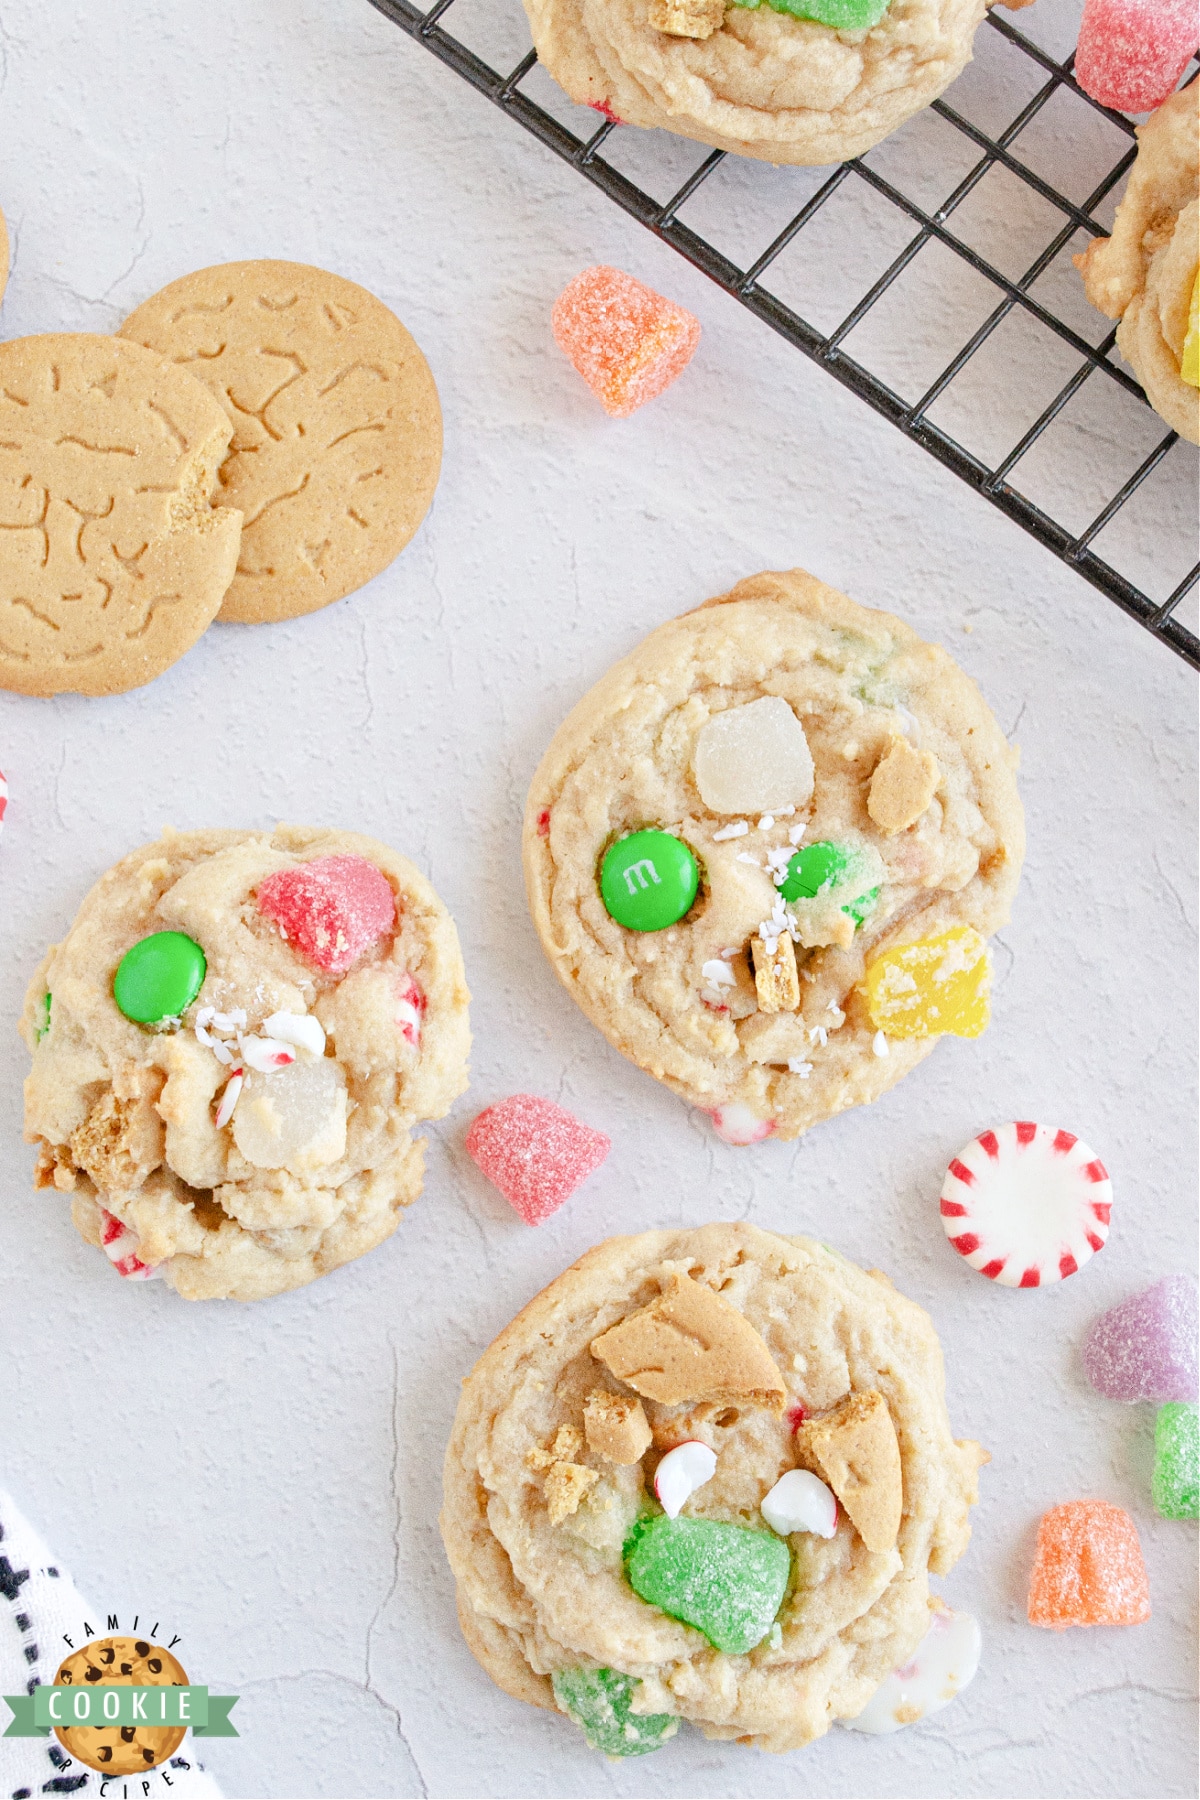 Cookies made with gingersnaps, gum drops and peppermint candies